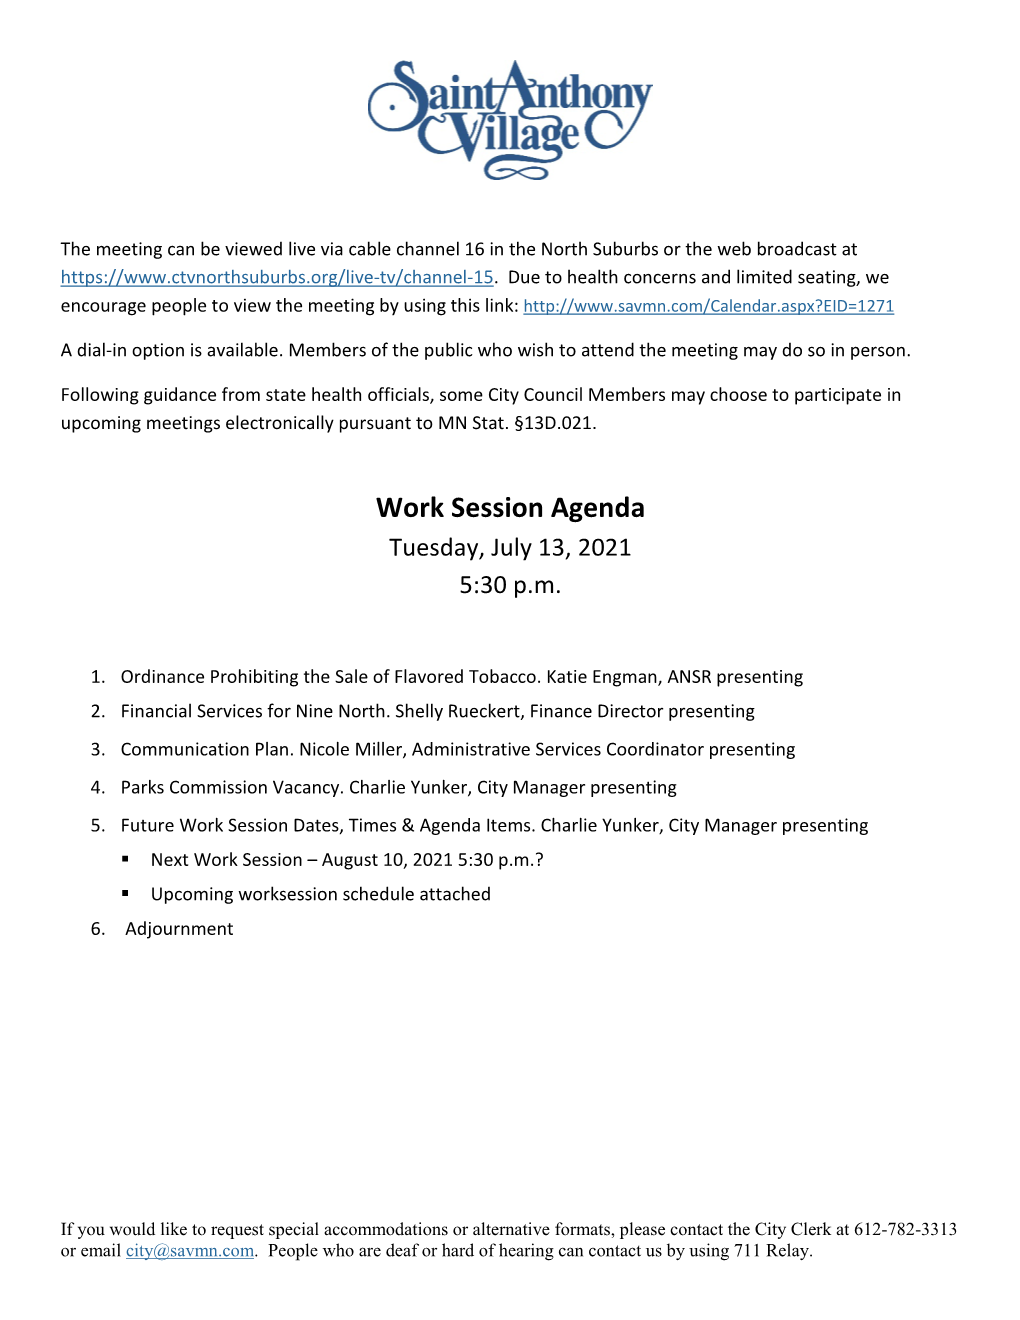 Work Session Agenda Tuesday, July 13, 2021 5:30 P.M